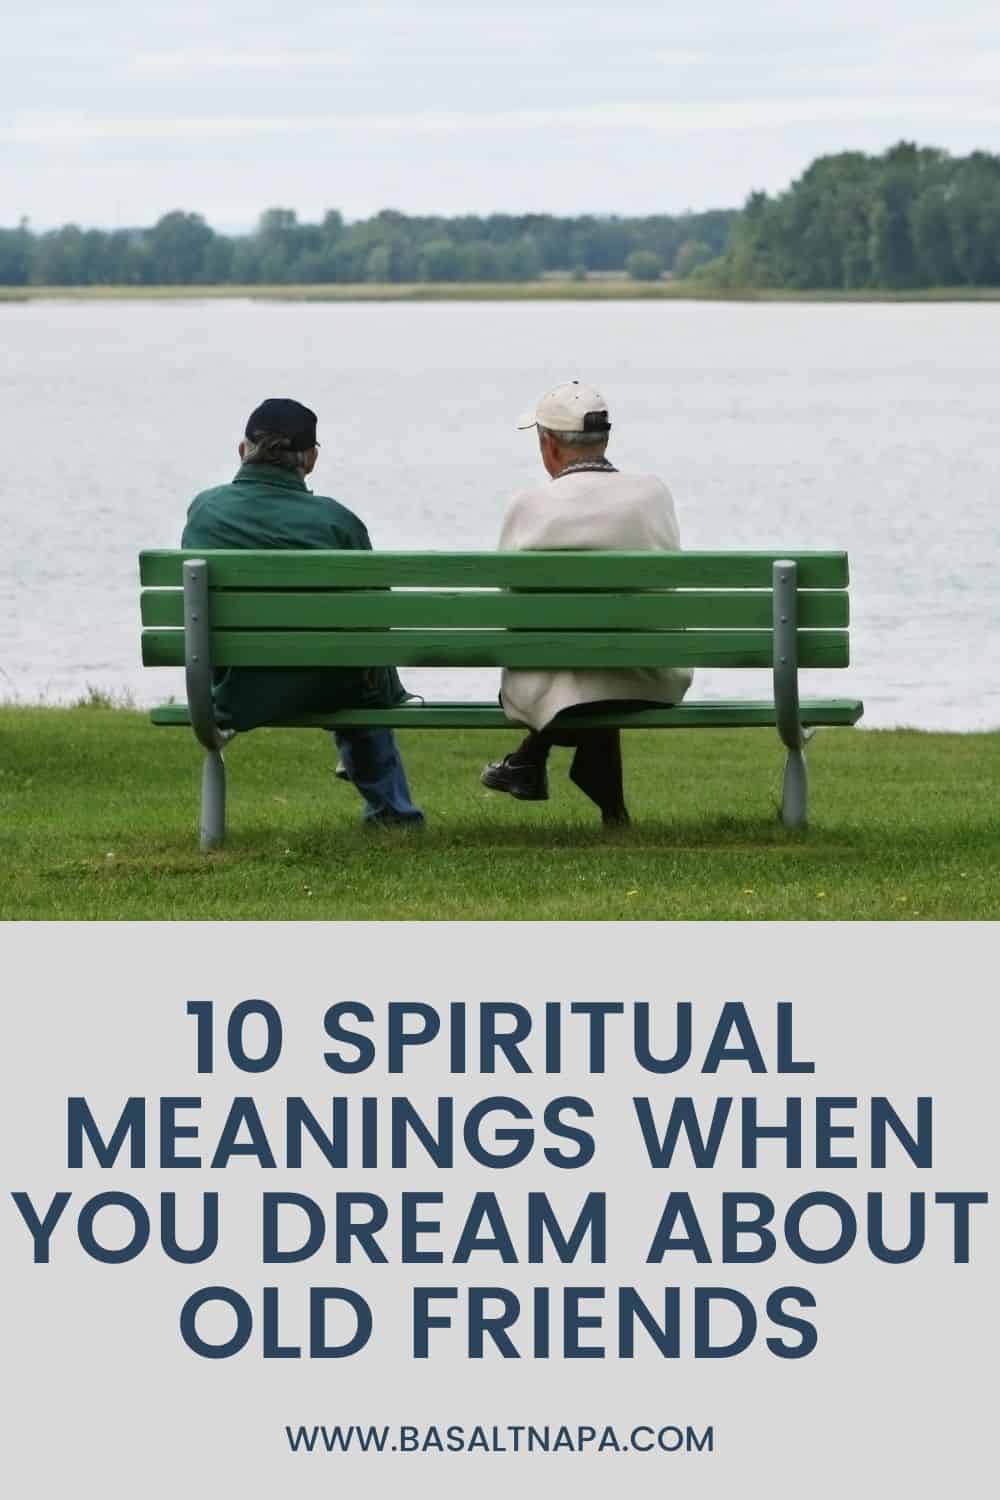 Spiritual Meanings When You Dream About Old Friends